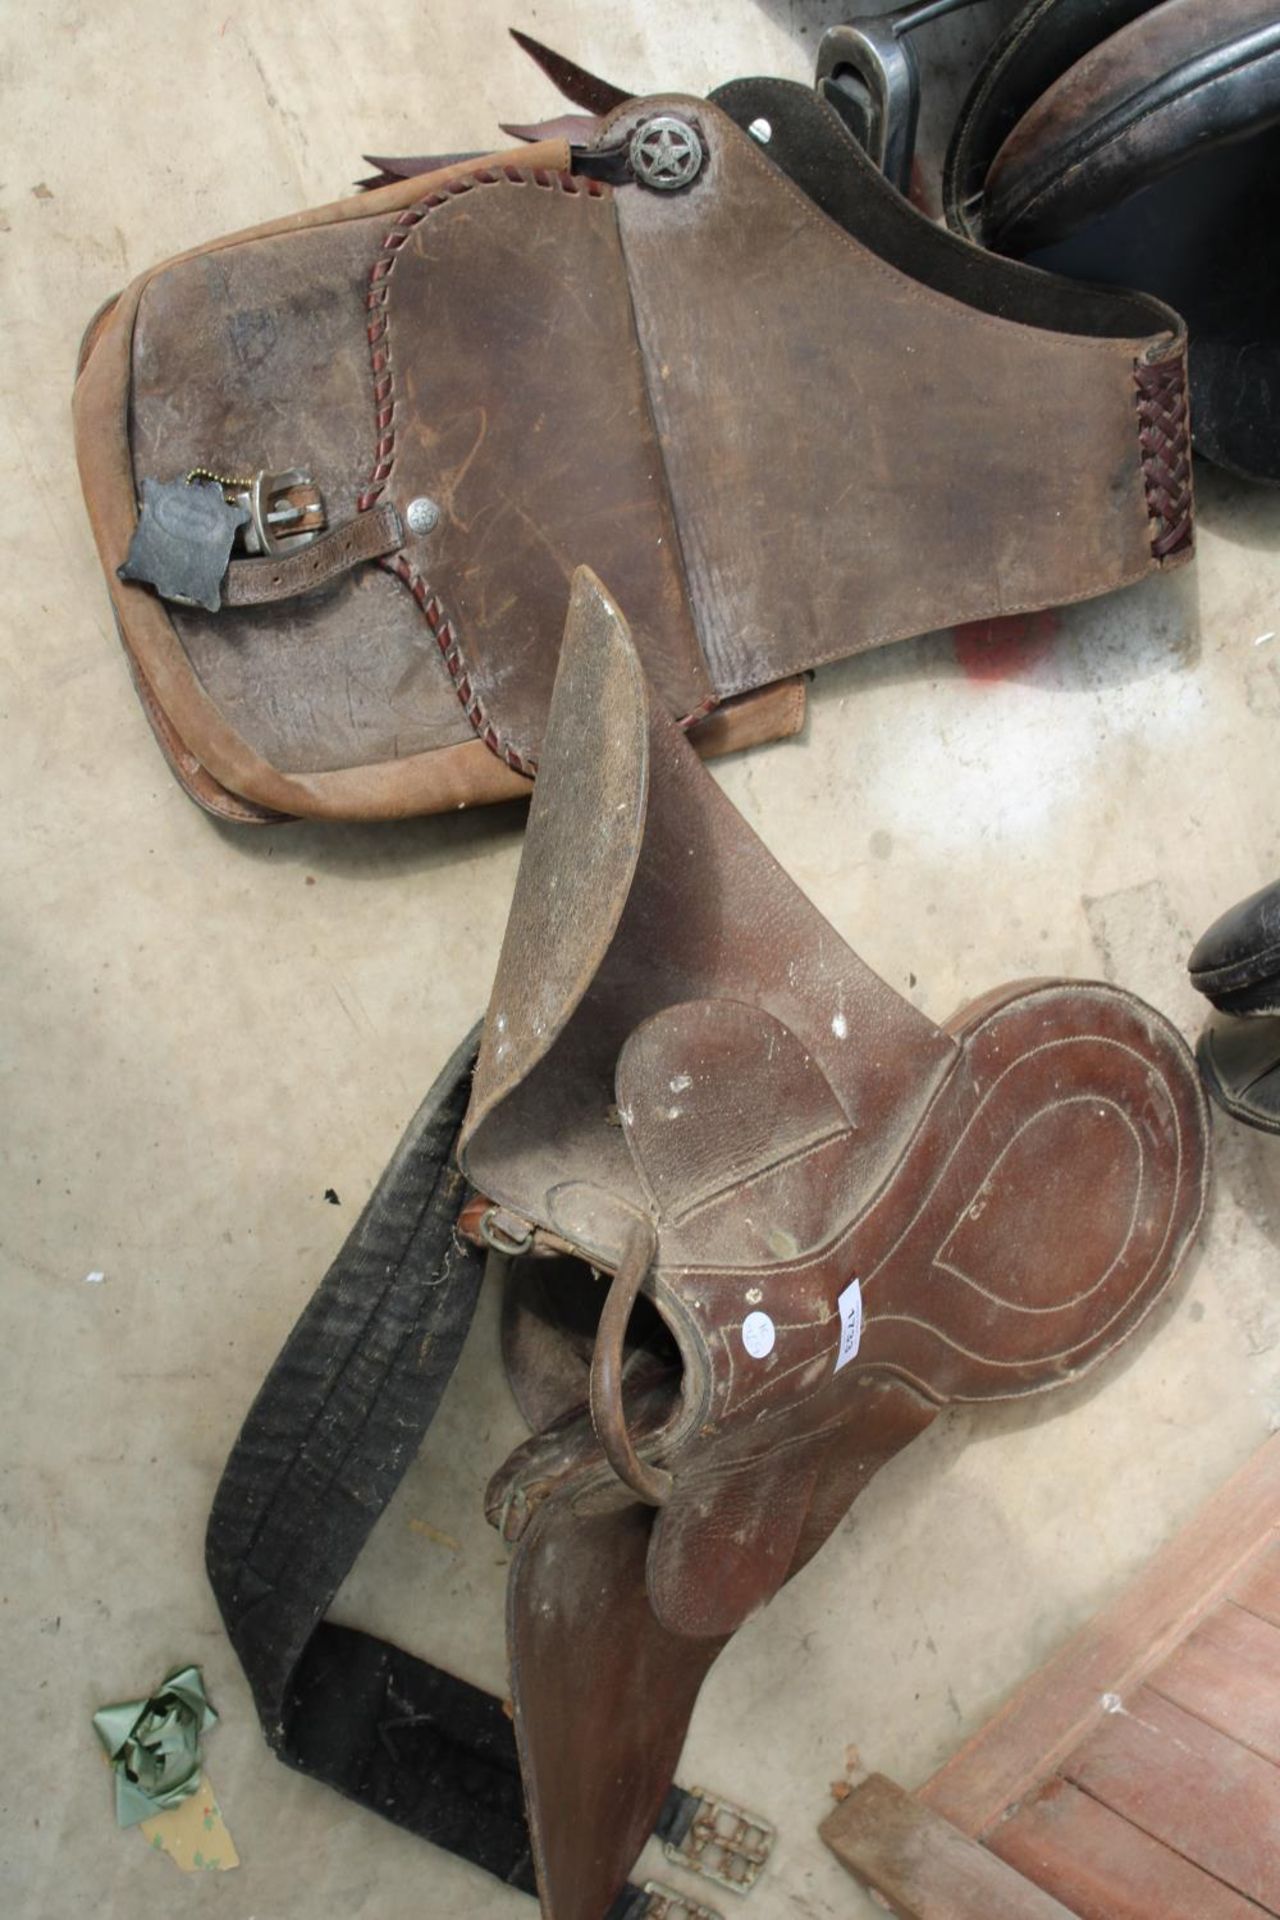 A STUBBEN HORSE SADDLE, A FURTHER PONY SADDLE AND A CARRY SADDLE BAG - Image 2 of 3